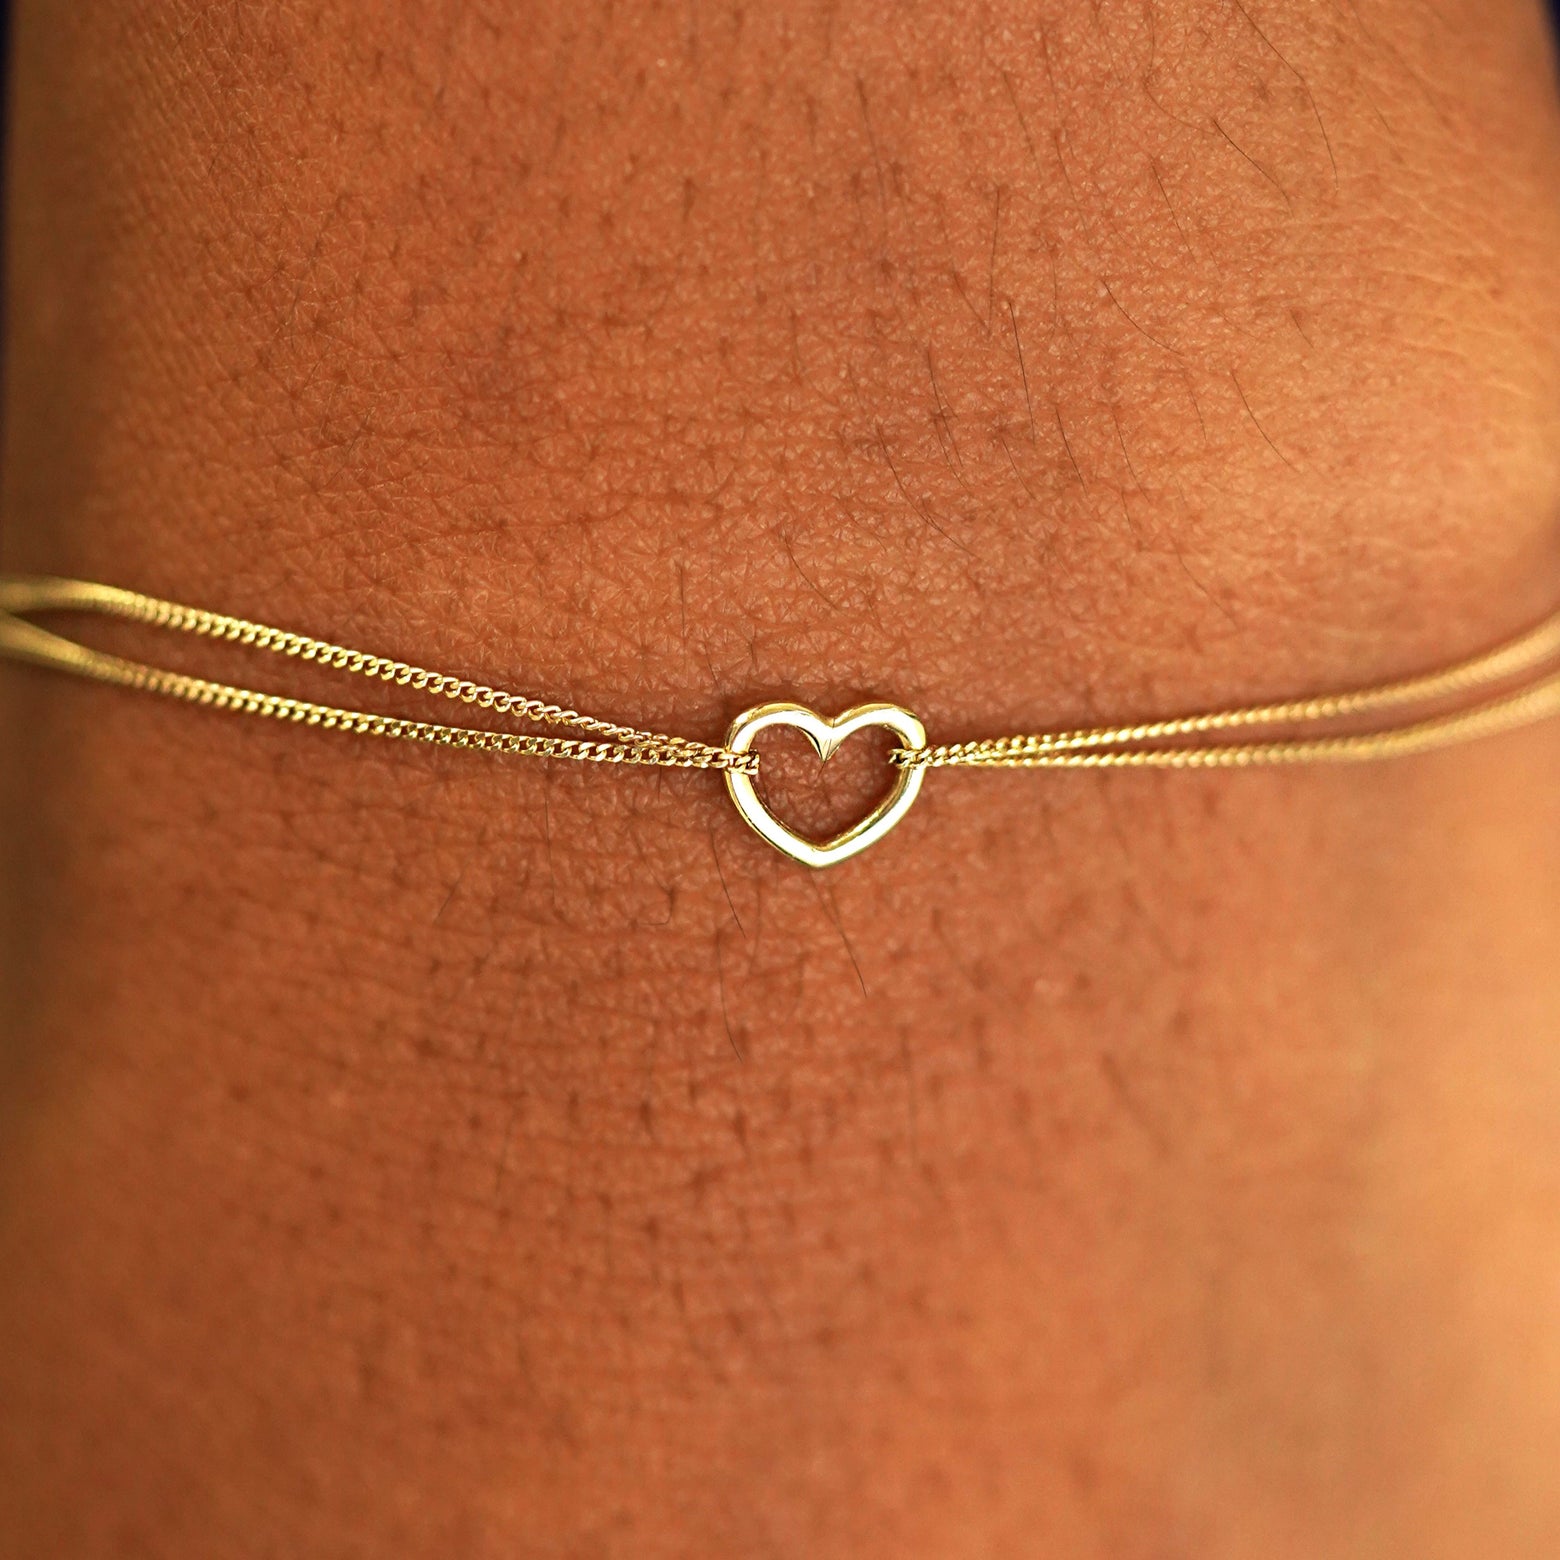 Close up view of a model's wrist wearing a solid yellow gold Heart Braceletv